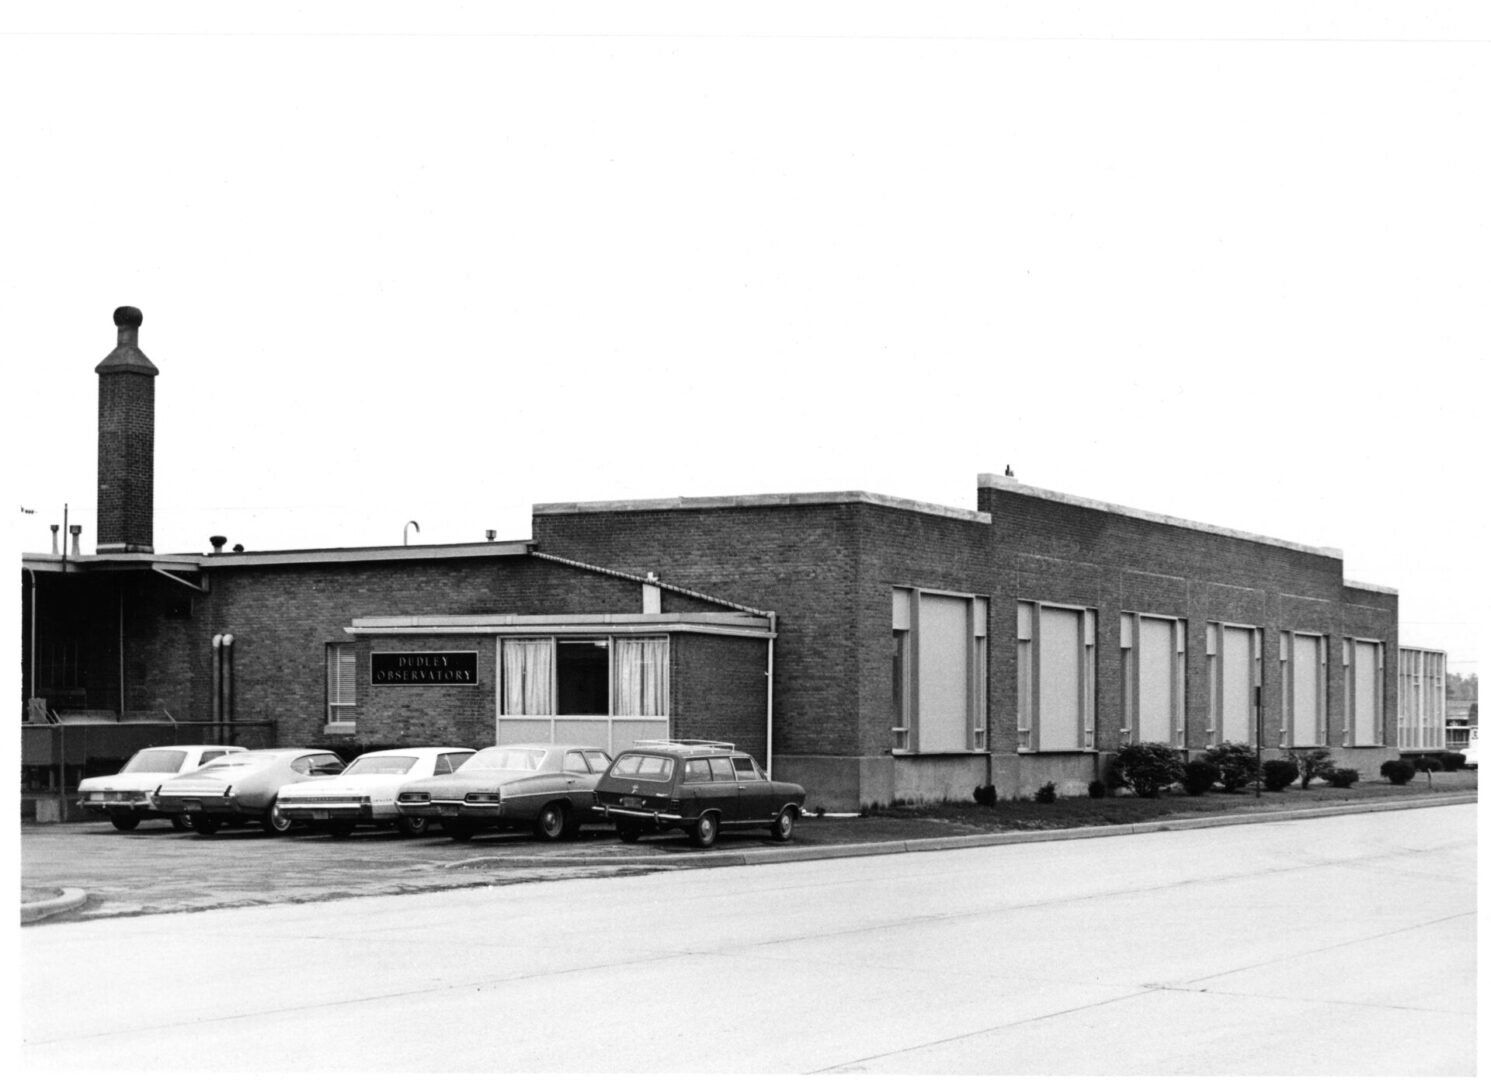 A black and white photo of a building with cars parked in front of it.